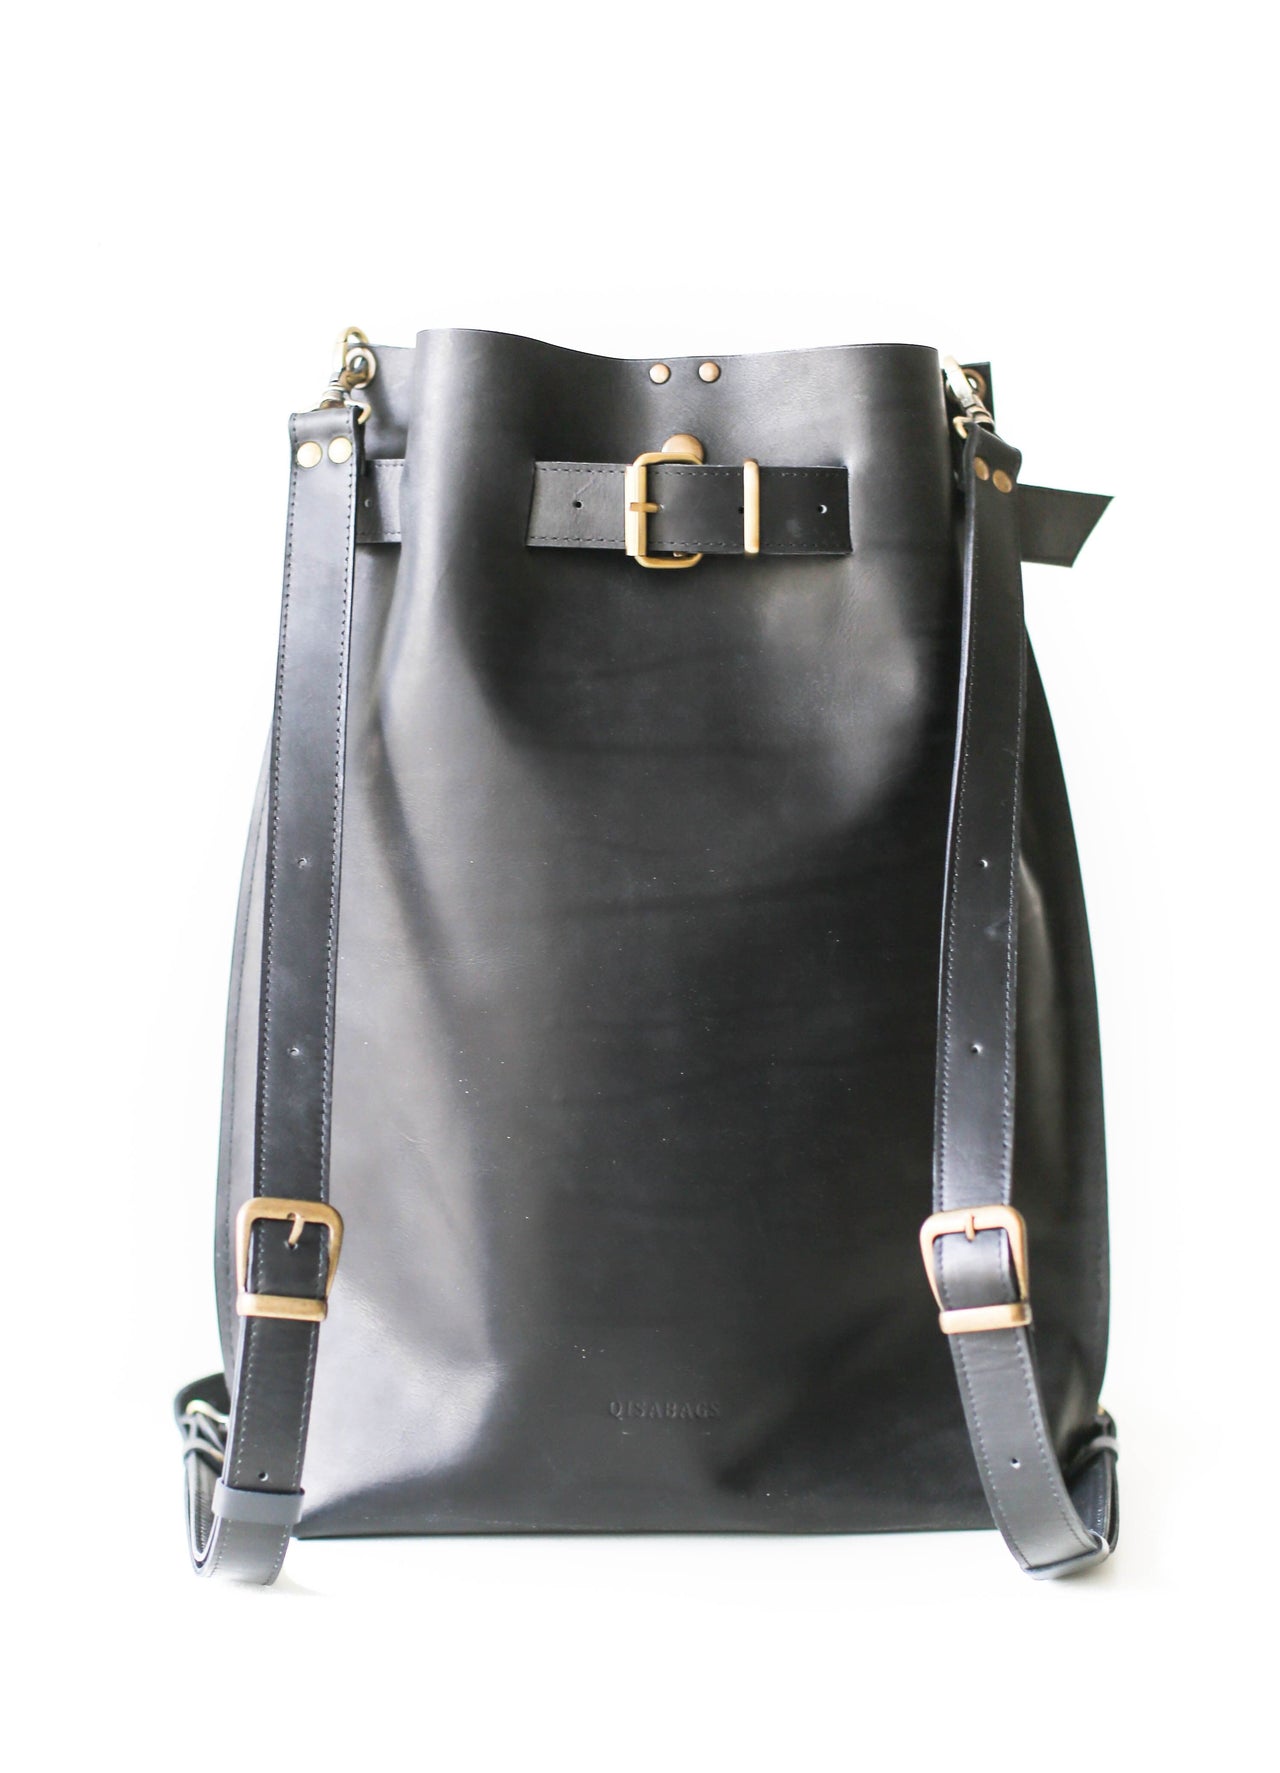 Under One Sky Leather Backpacks for Women